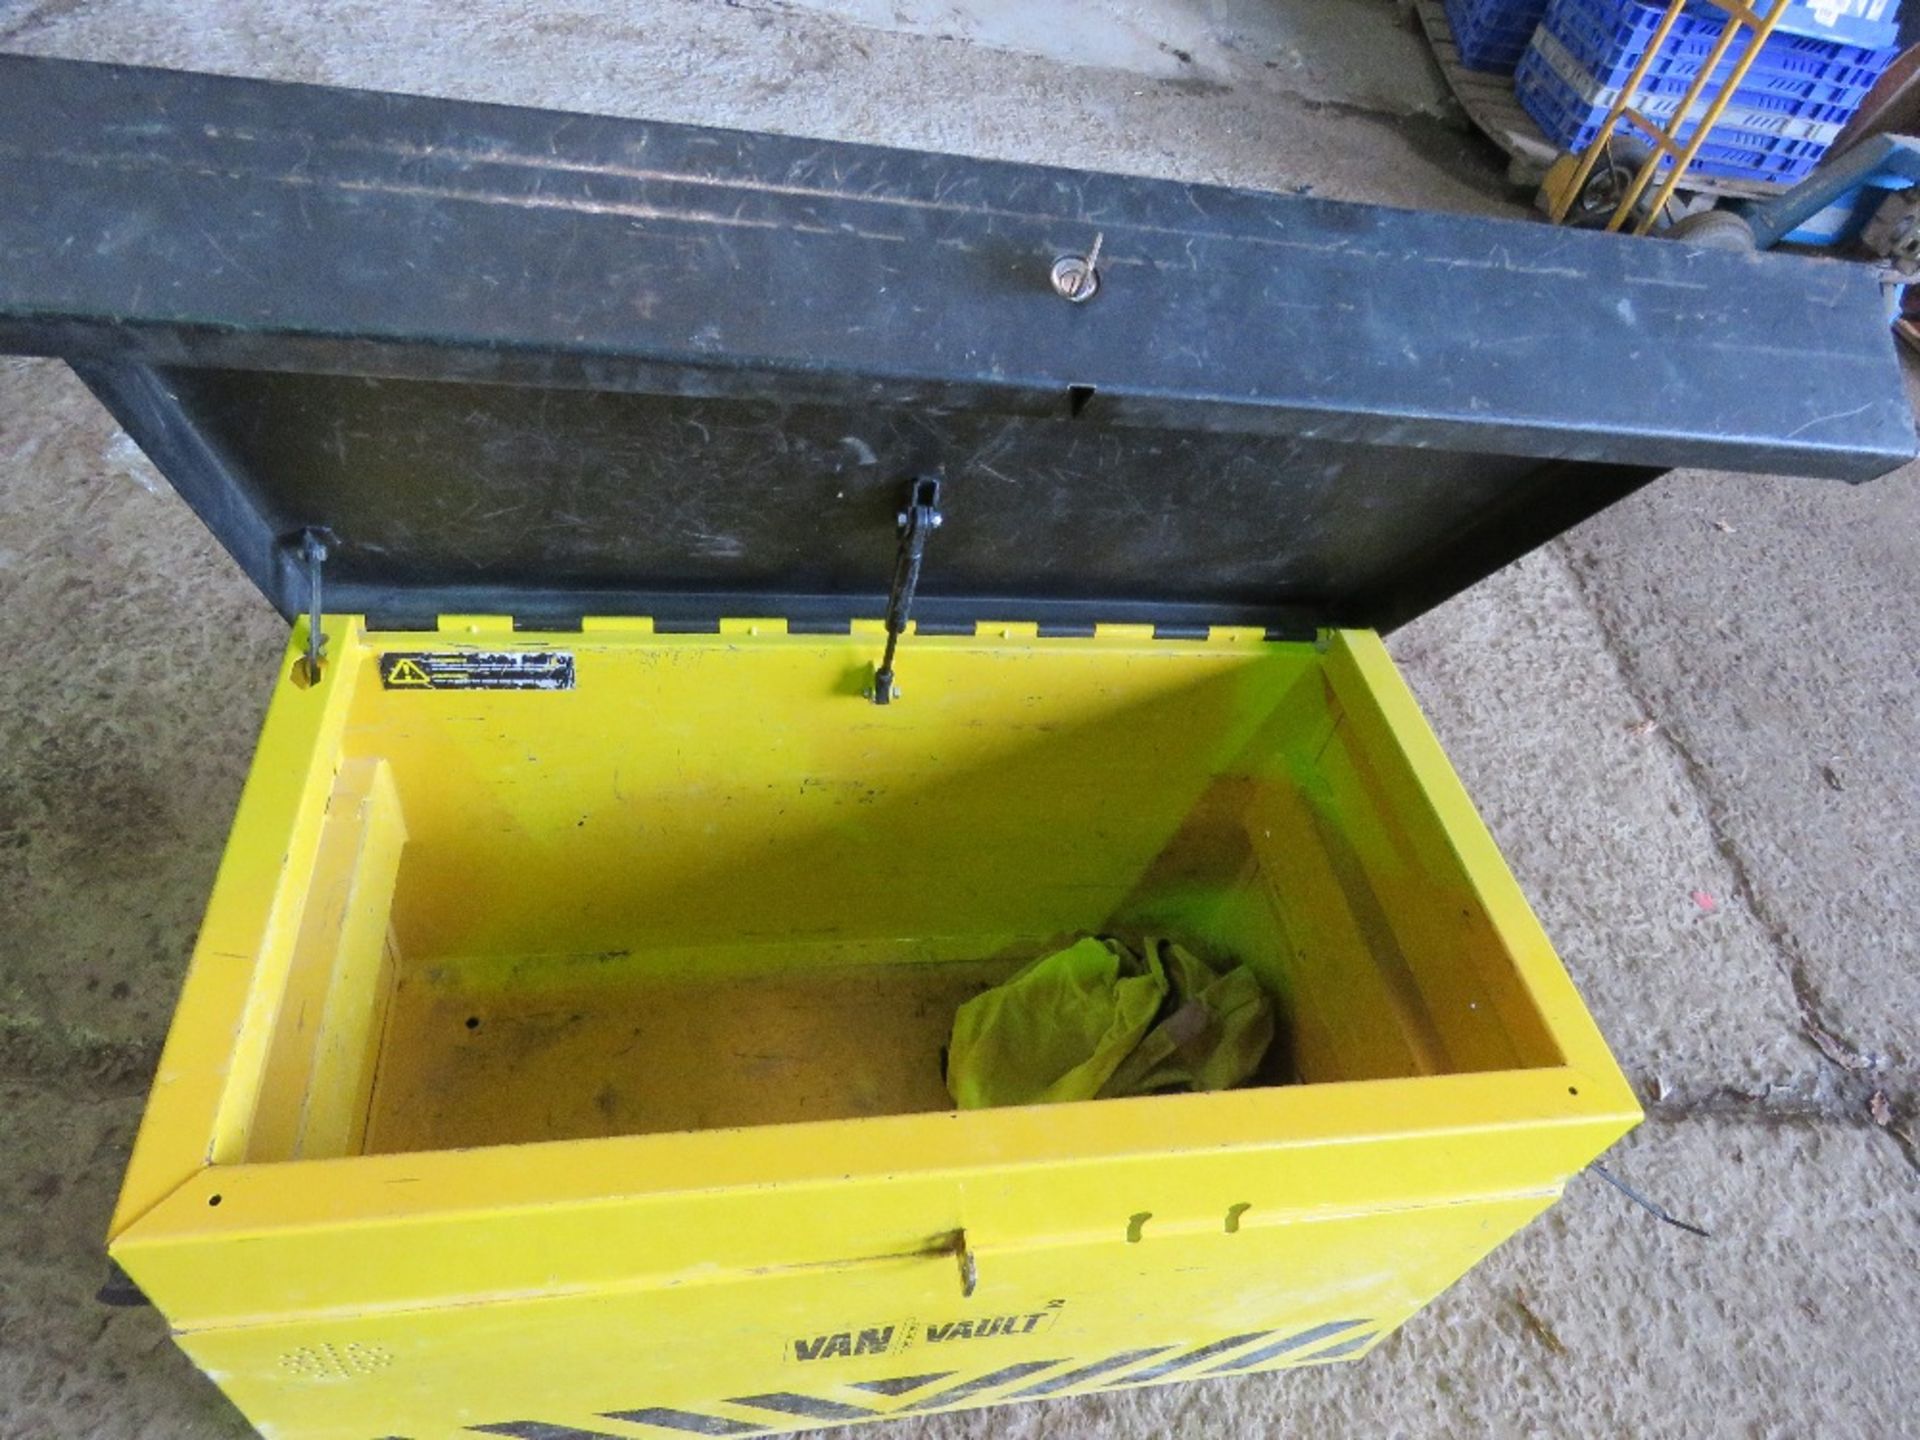 tool box with keys. no vat on hammer price - Image 5 of 5